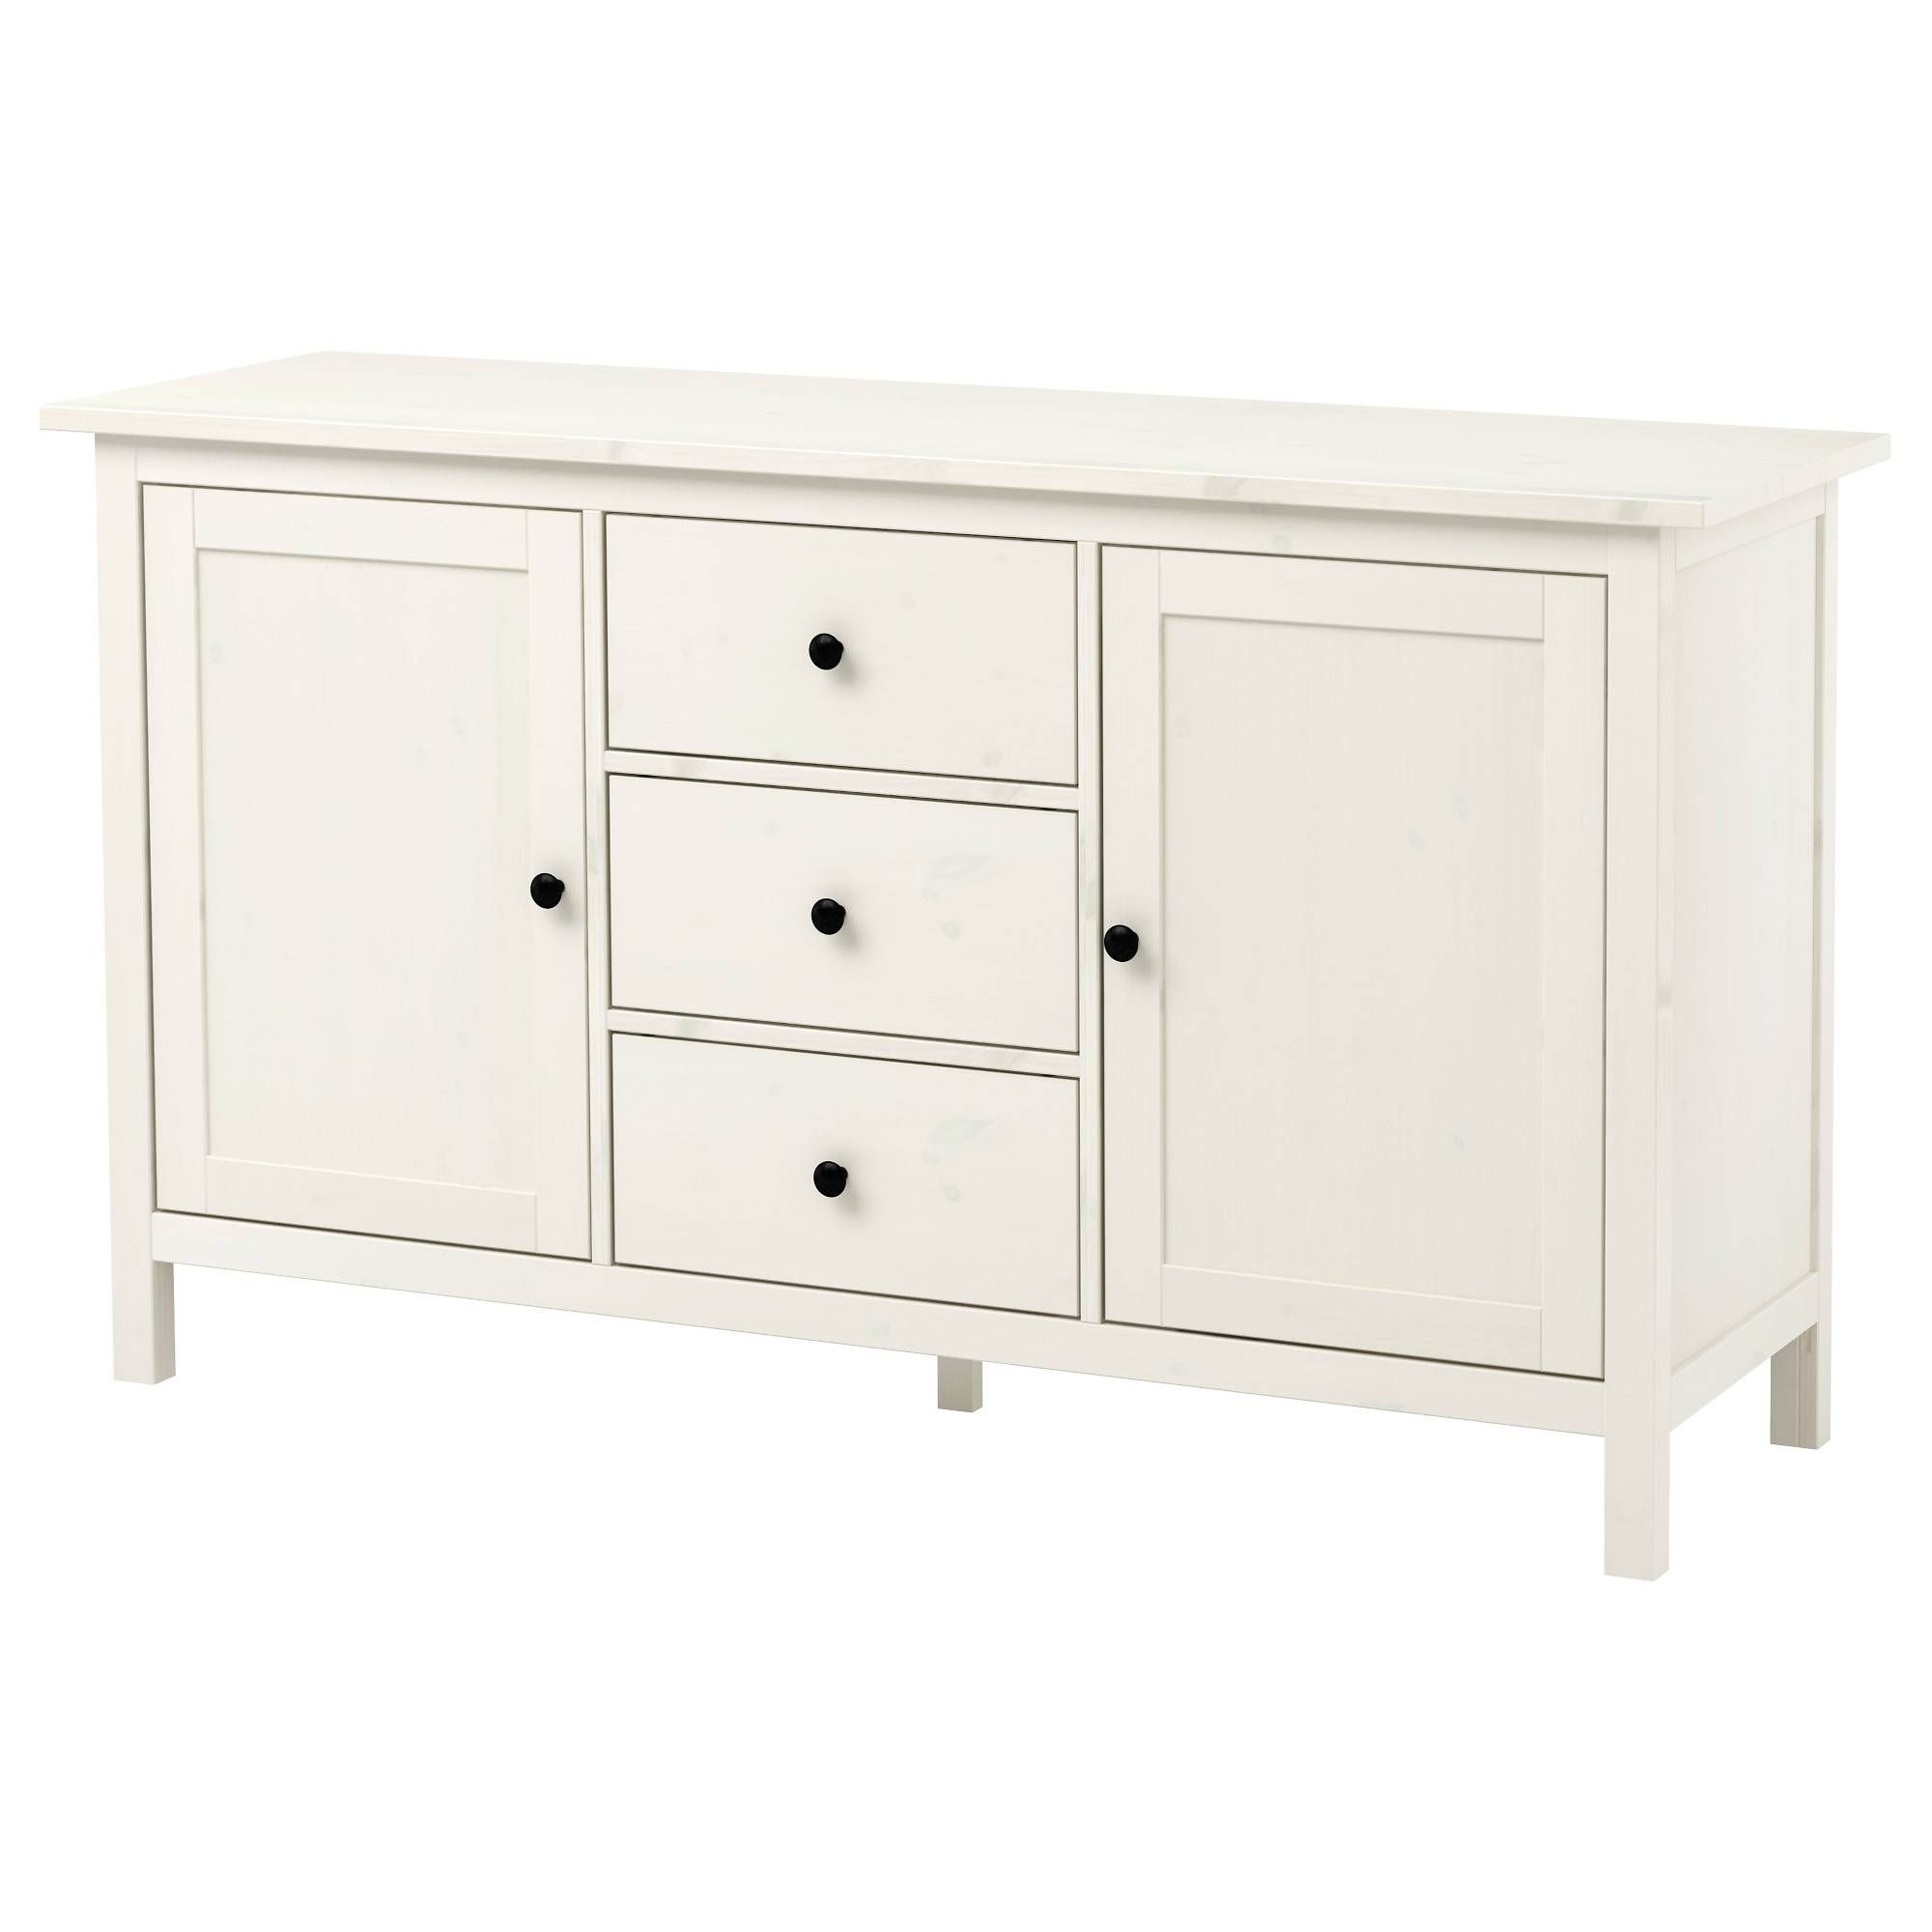 Sideboards & Buffet Cabinets | Ikea Inside White Glass Sideboard (View 4 of 20)